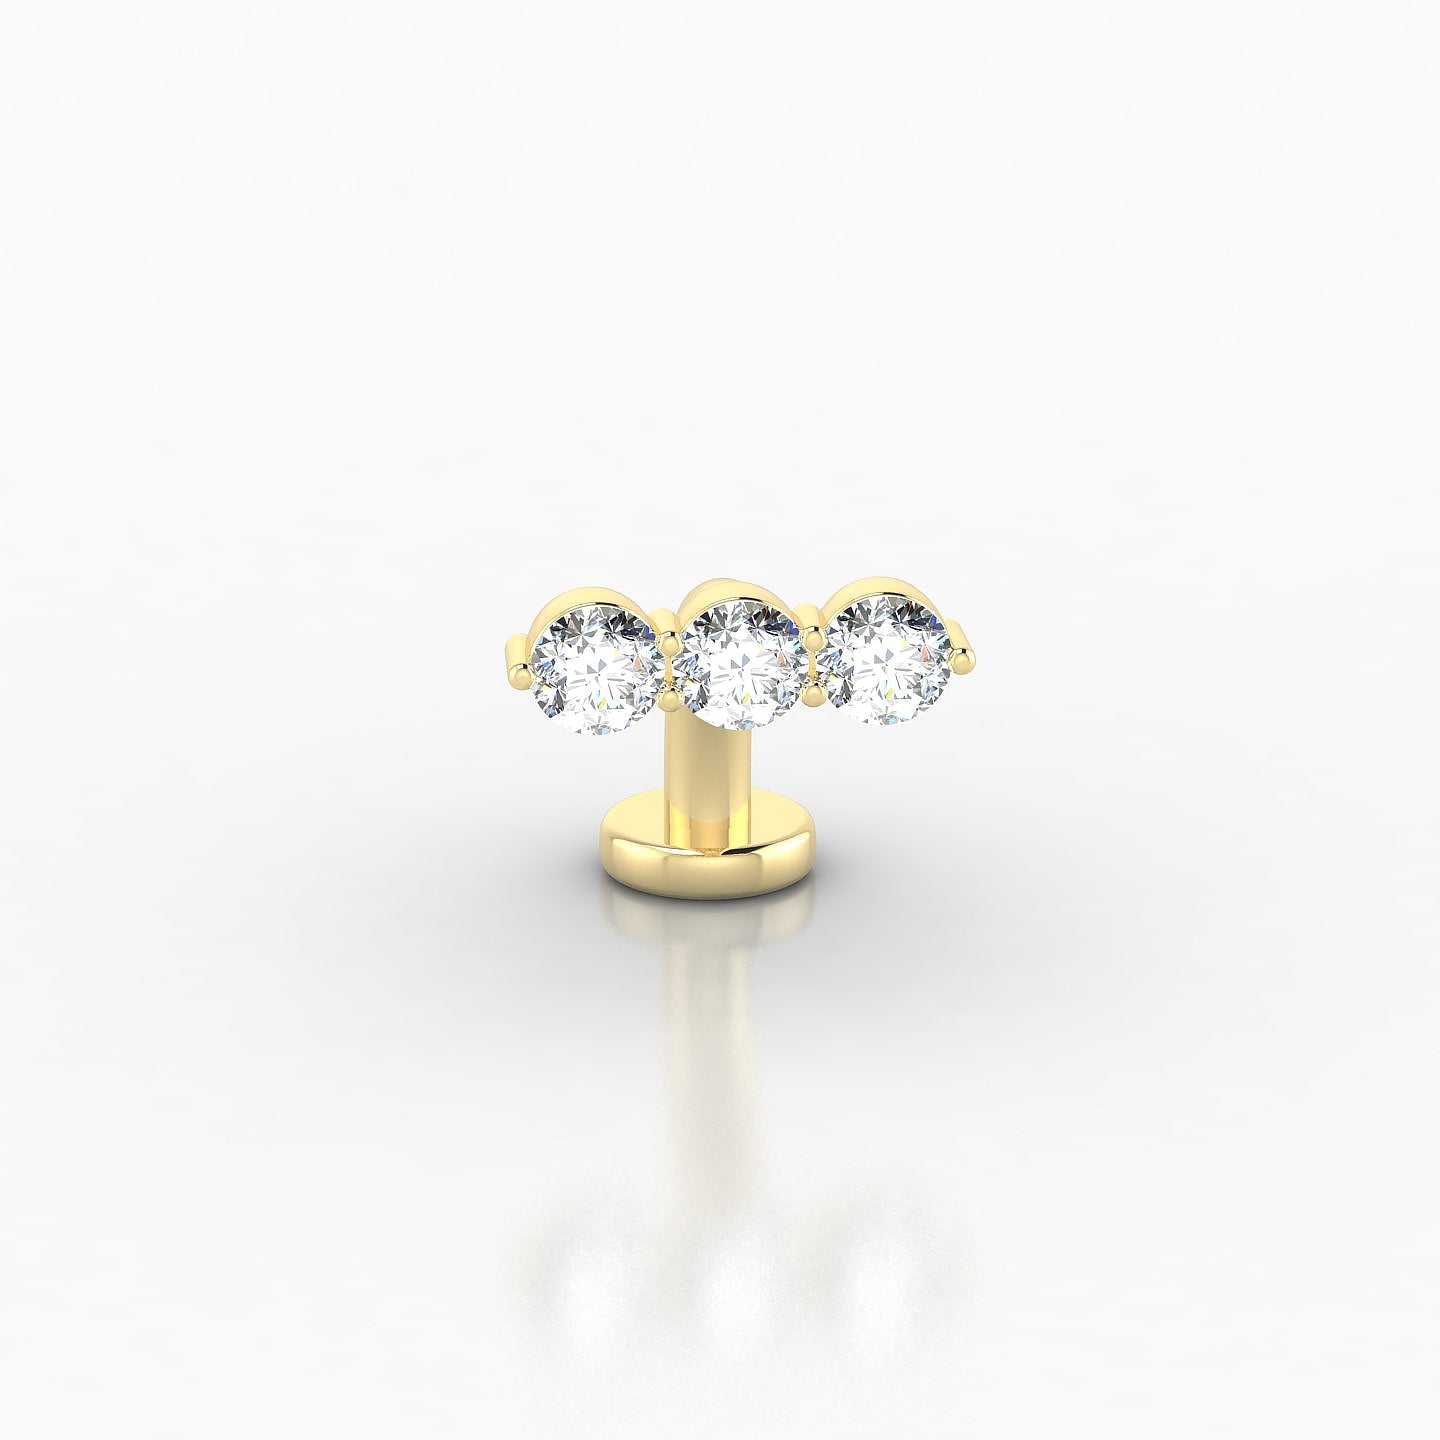 Ma'at | 18k Yellow Gold 8 mm 9 mm Trilogy Diamond Floating Navel Piercing